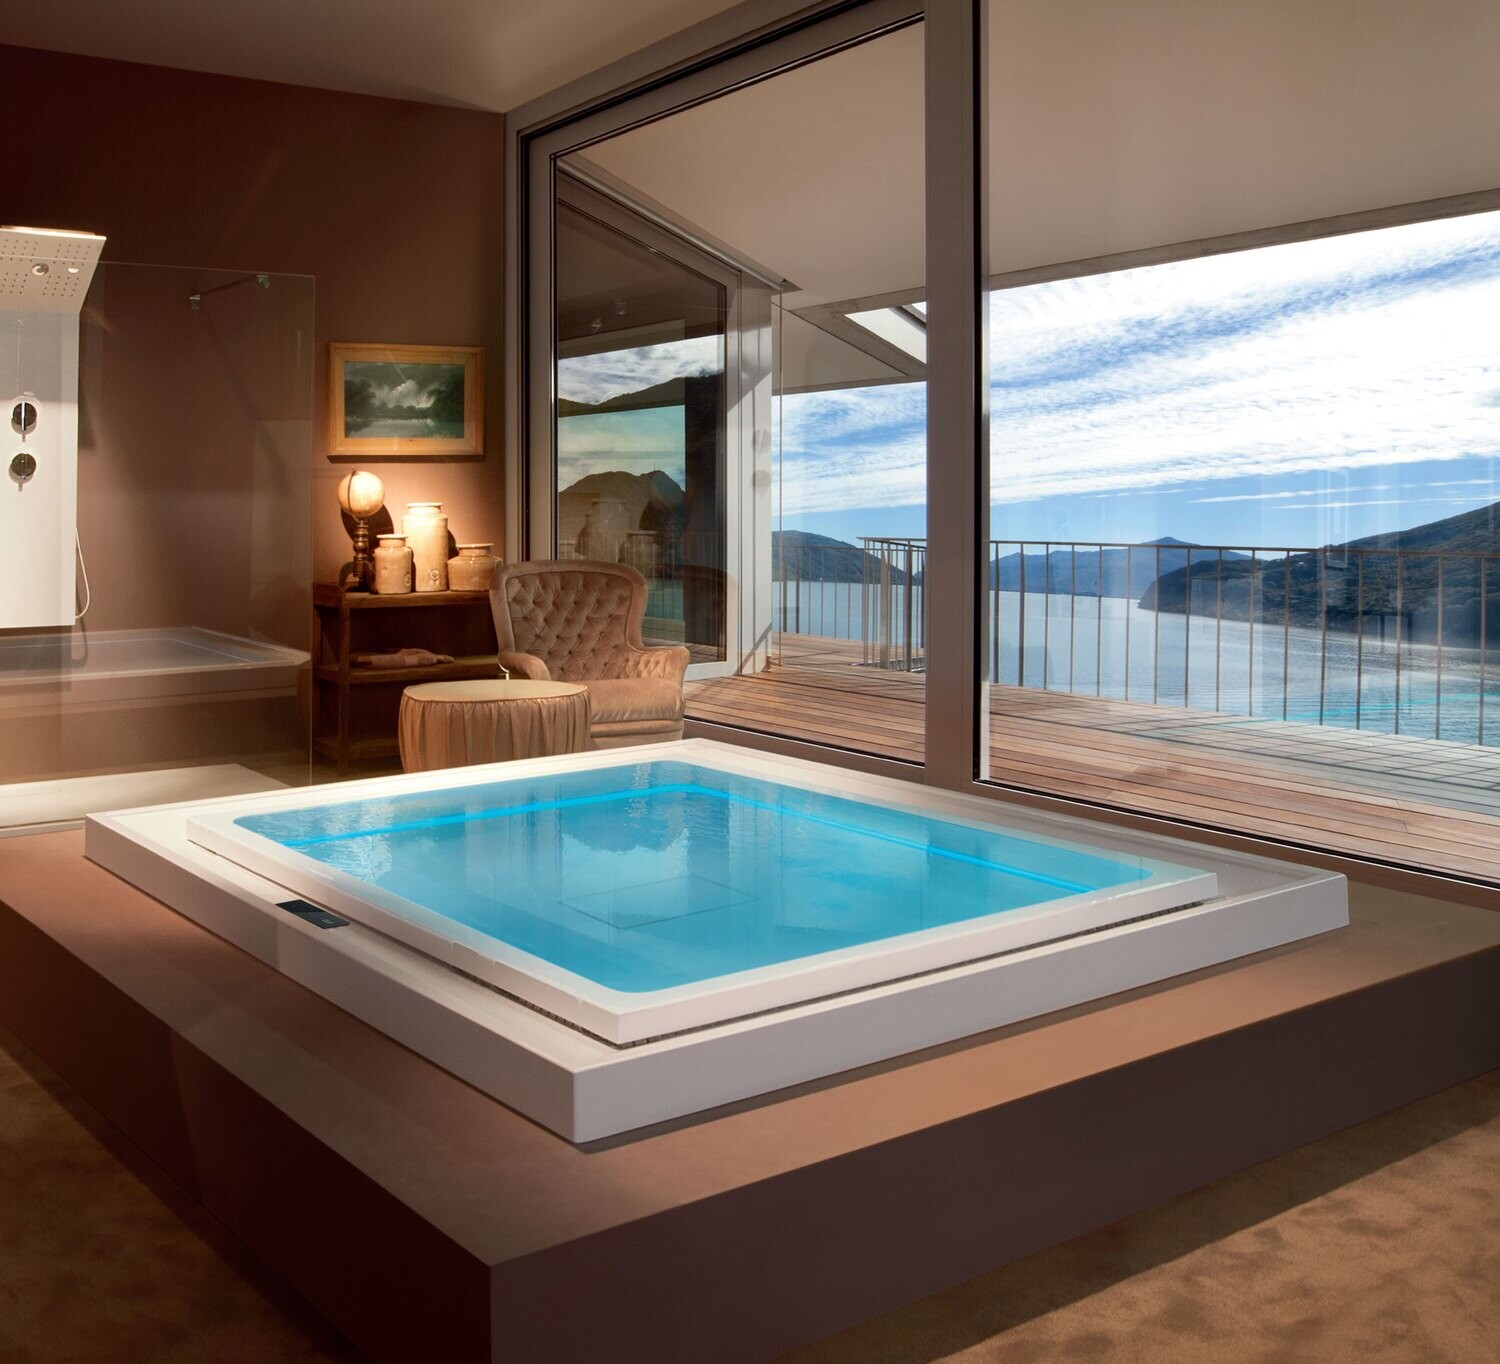 TREESSE Whirlpool MODEL(GHOST SYSTEM)FUSION SPA230
230 x 180 x 67h INDOOR